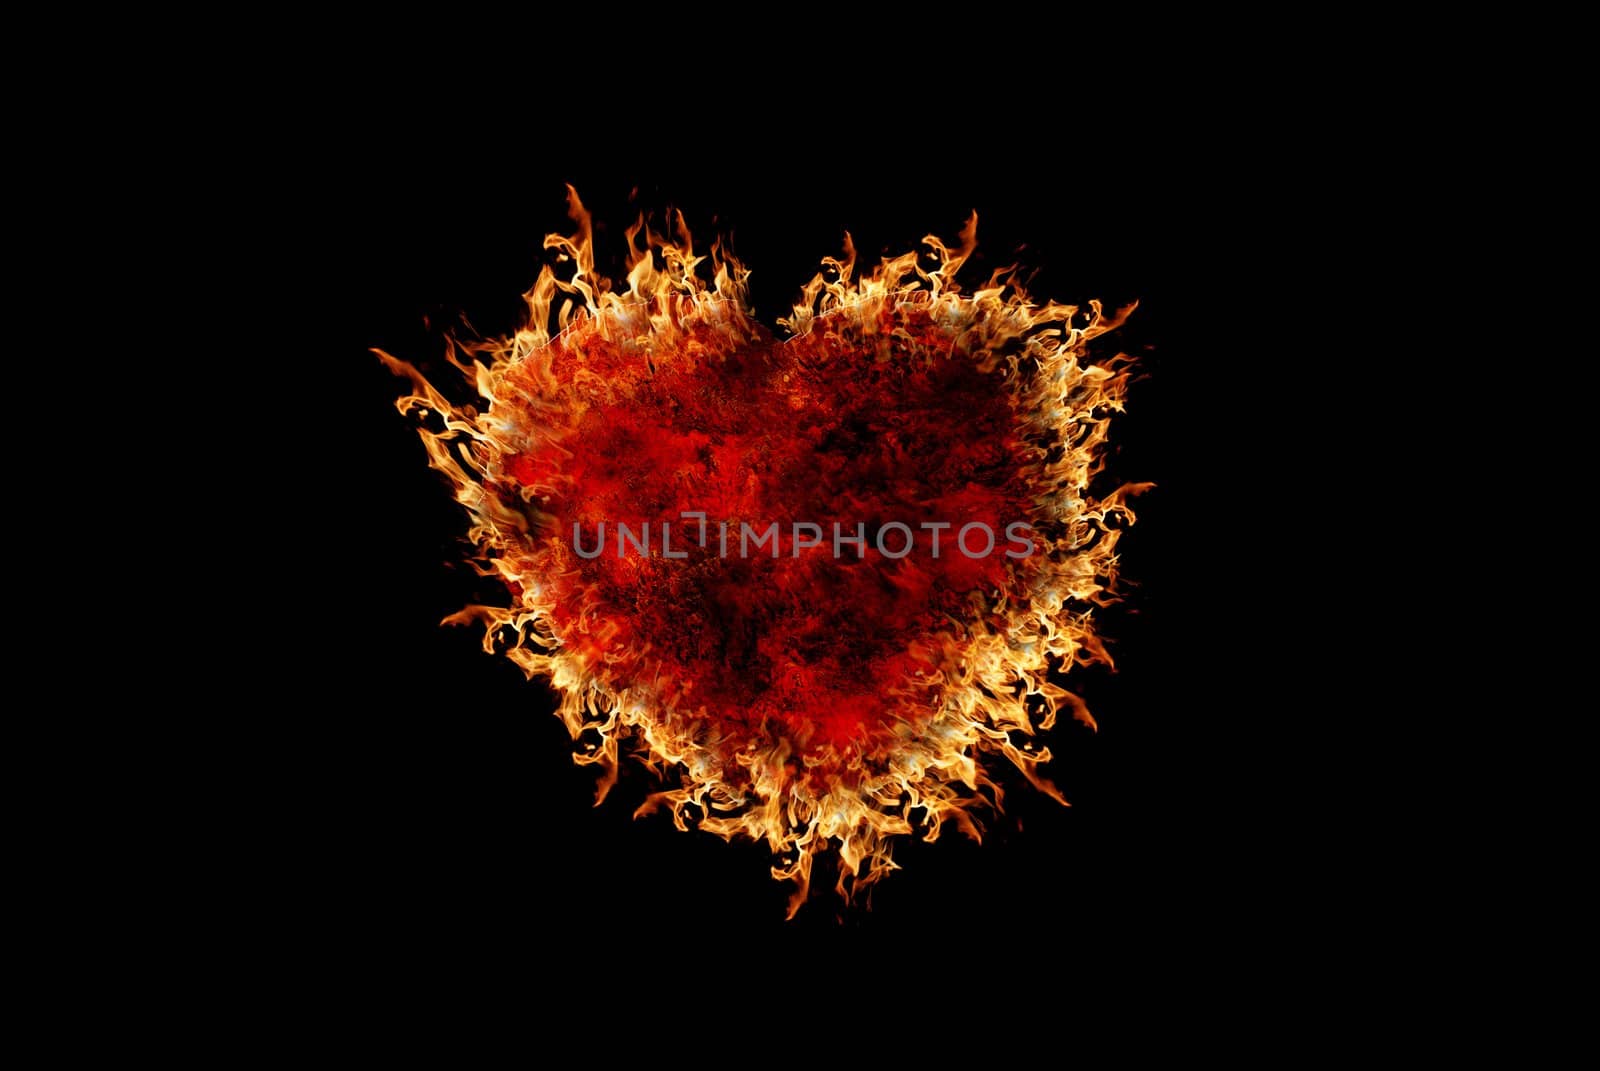 Burning heart with flame effect and black isolated background, can be use for various love related concepts, design and print out.